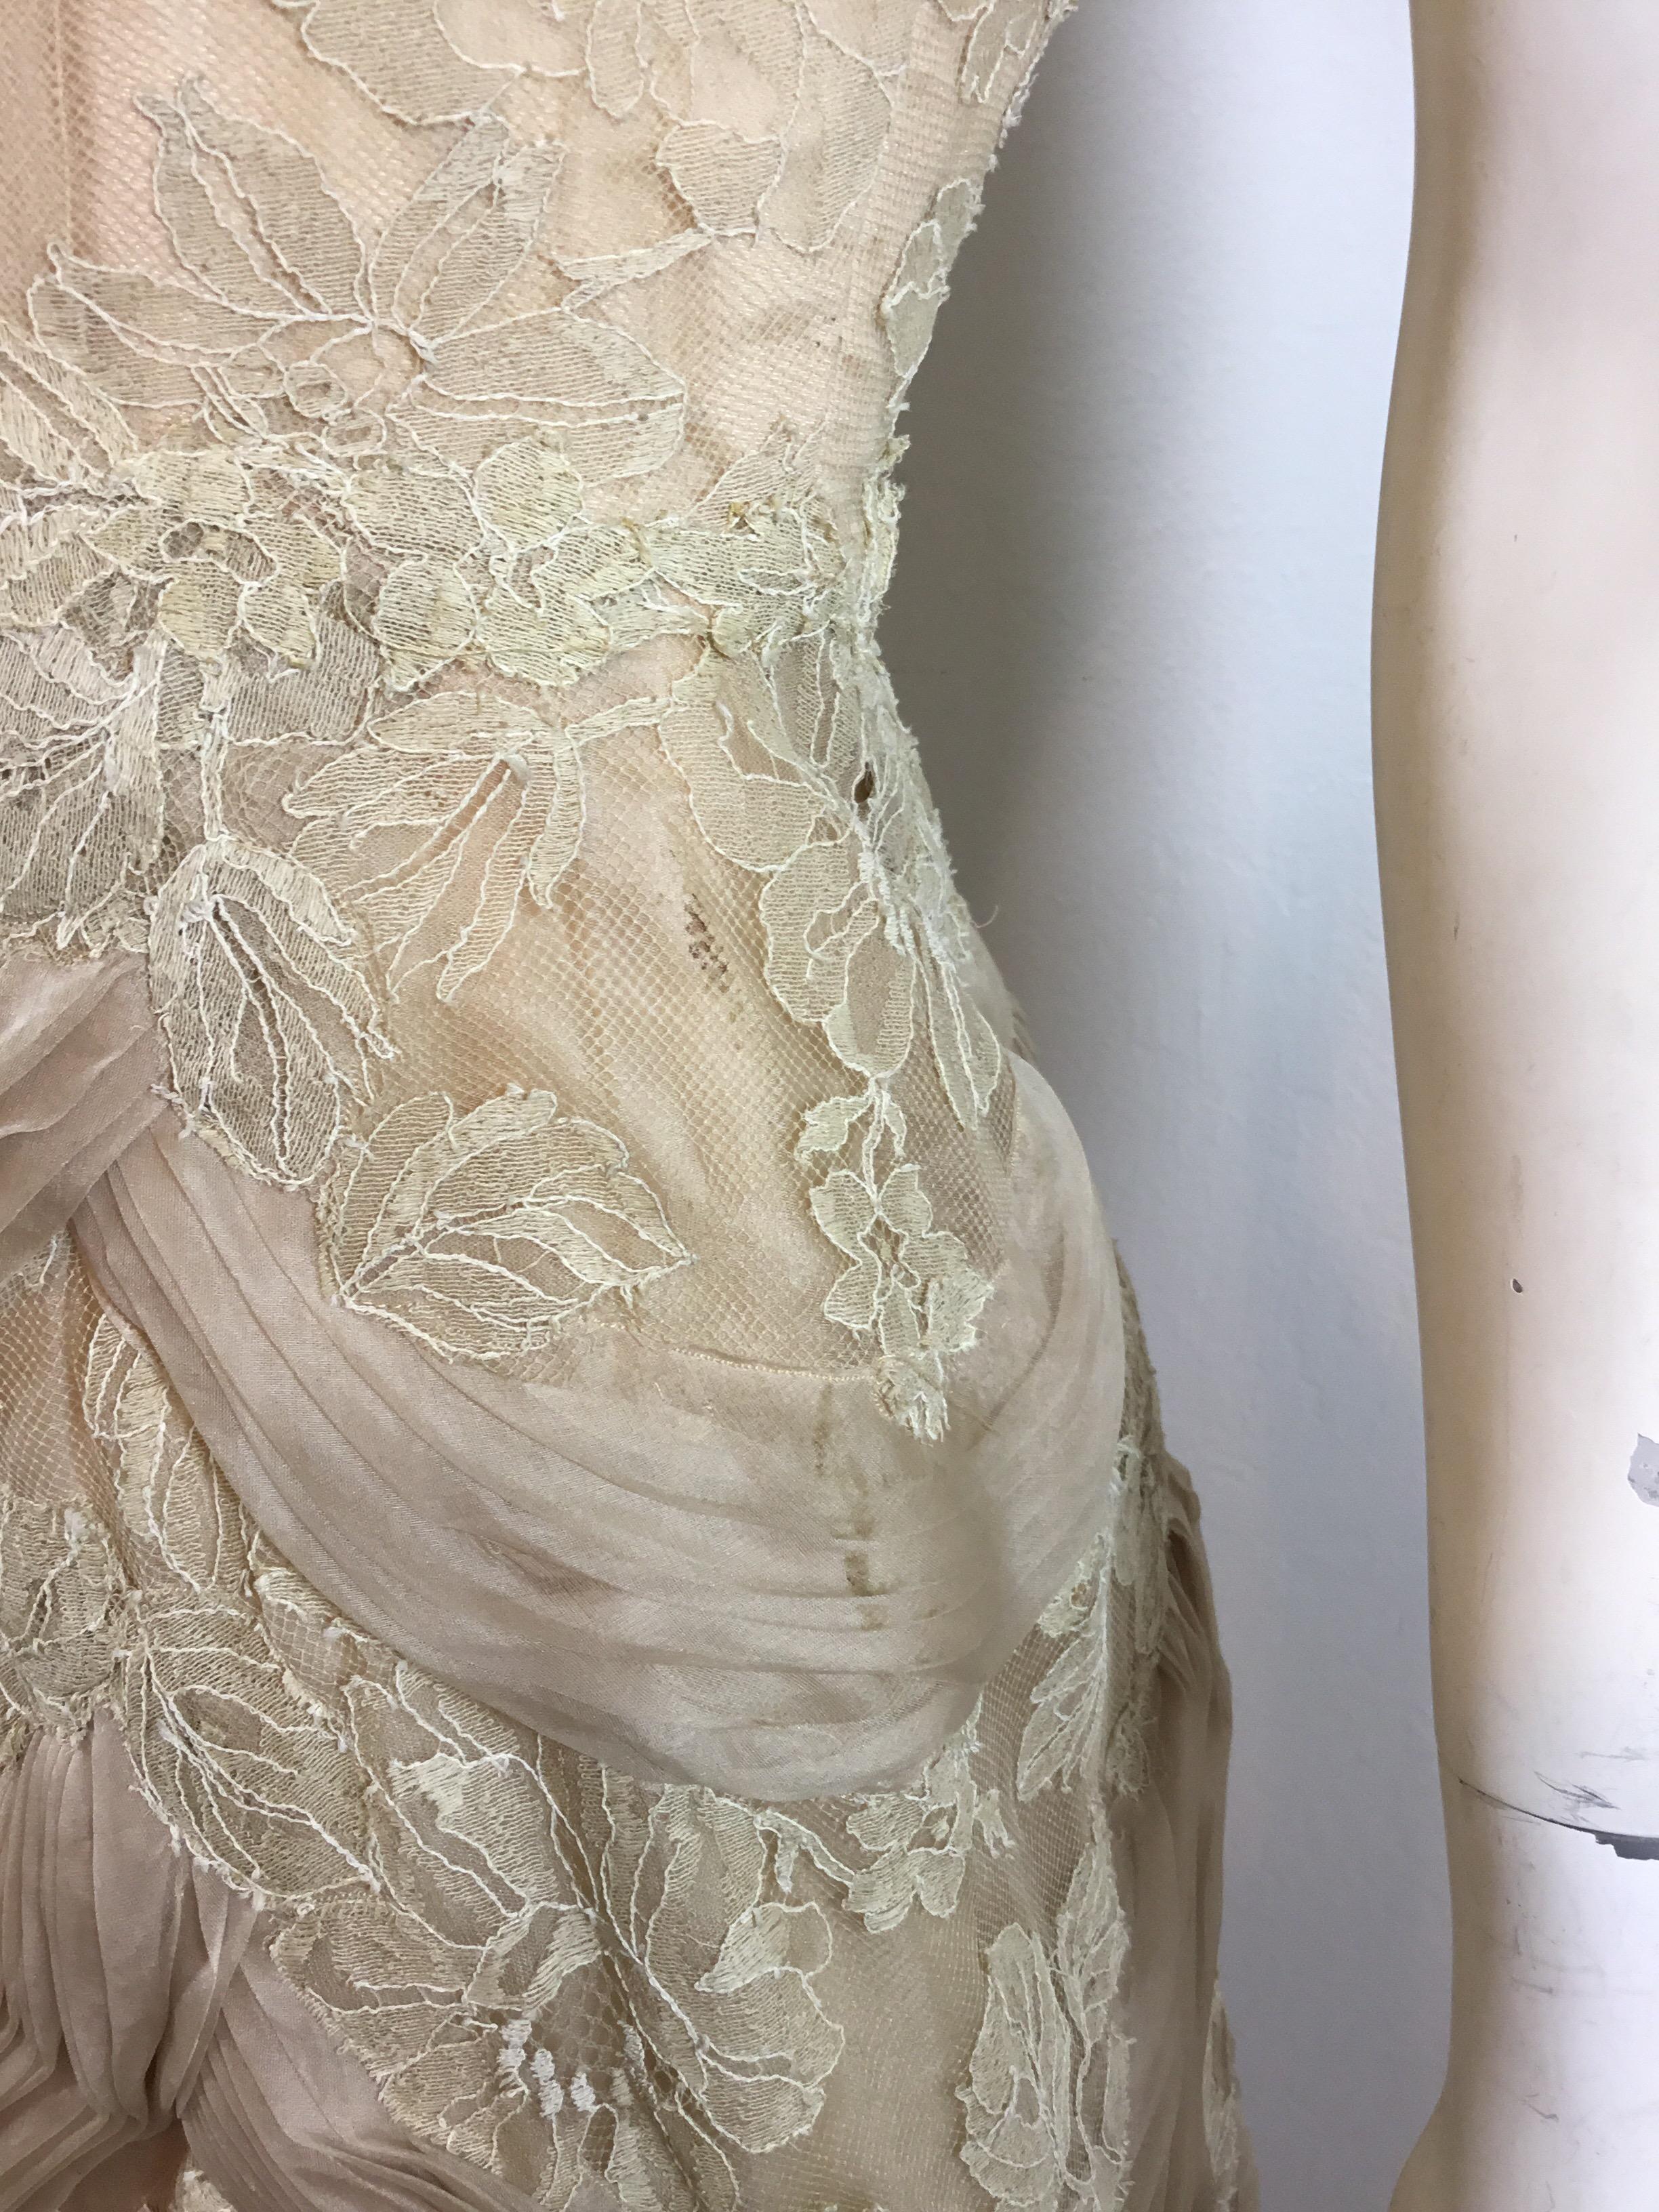 Ceil Chapman Lace Vintage Dress In Good Condition For Sale In Carmel, CA